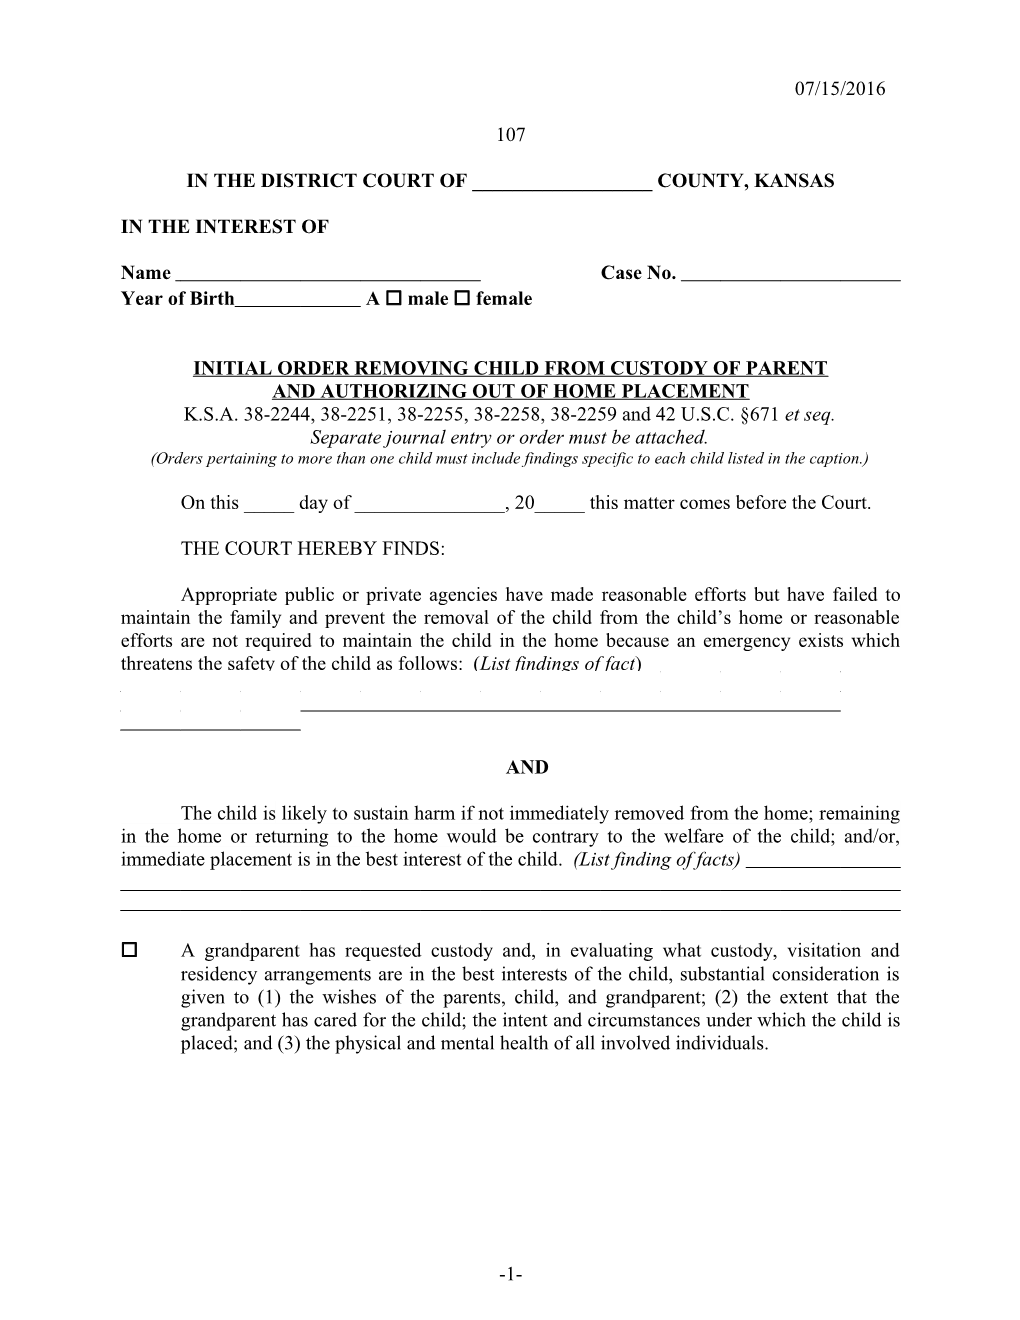 Initial Order Removing Child from Custody of Parent